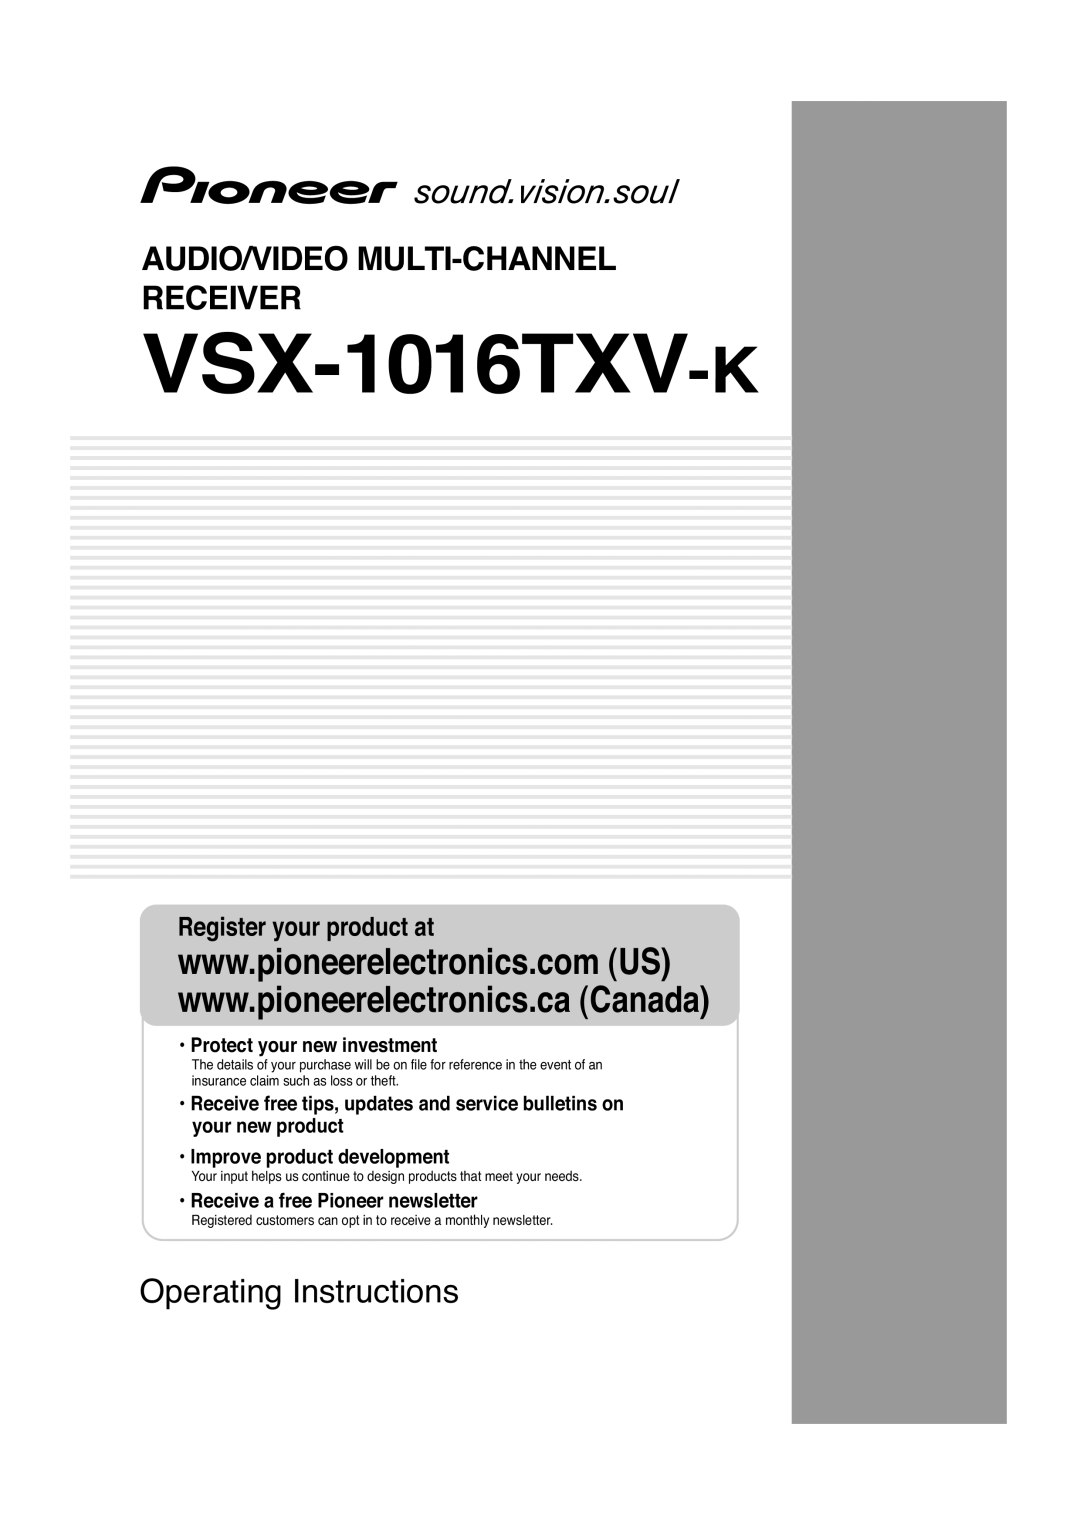 Pioneer VSX-1016TXV-K operating instructions Audio/Video Multi-Channelreceiver, Operating Instructions 